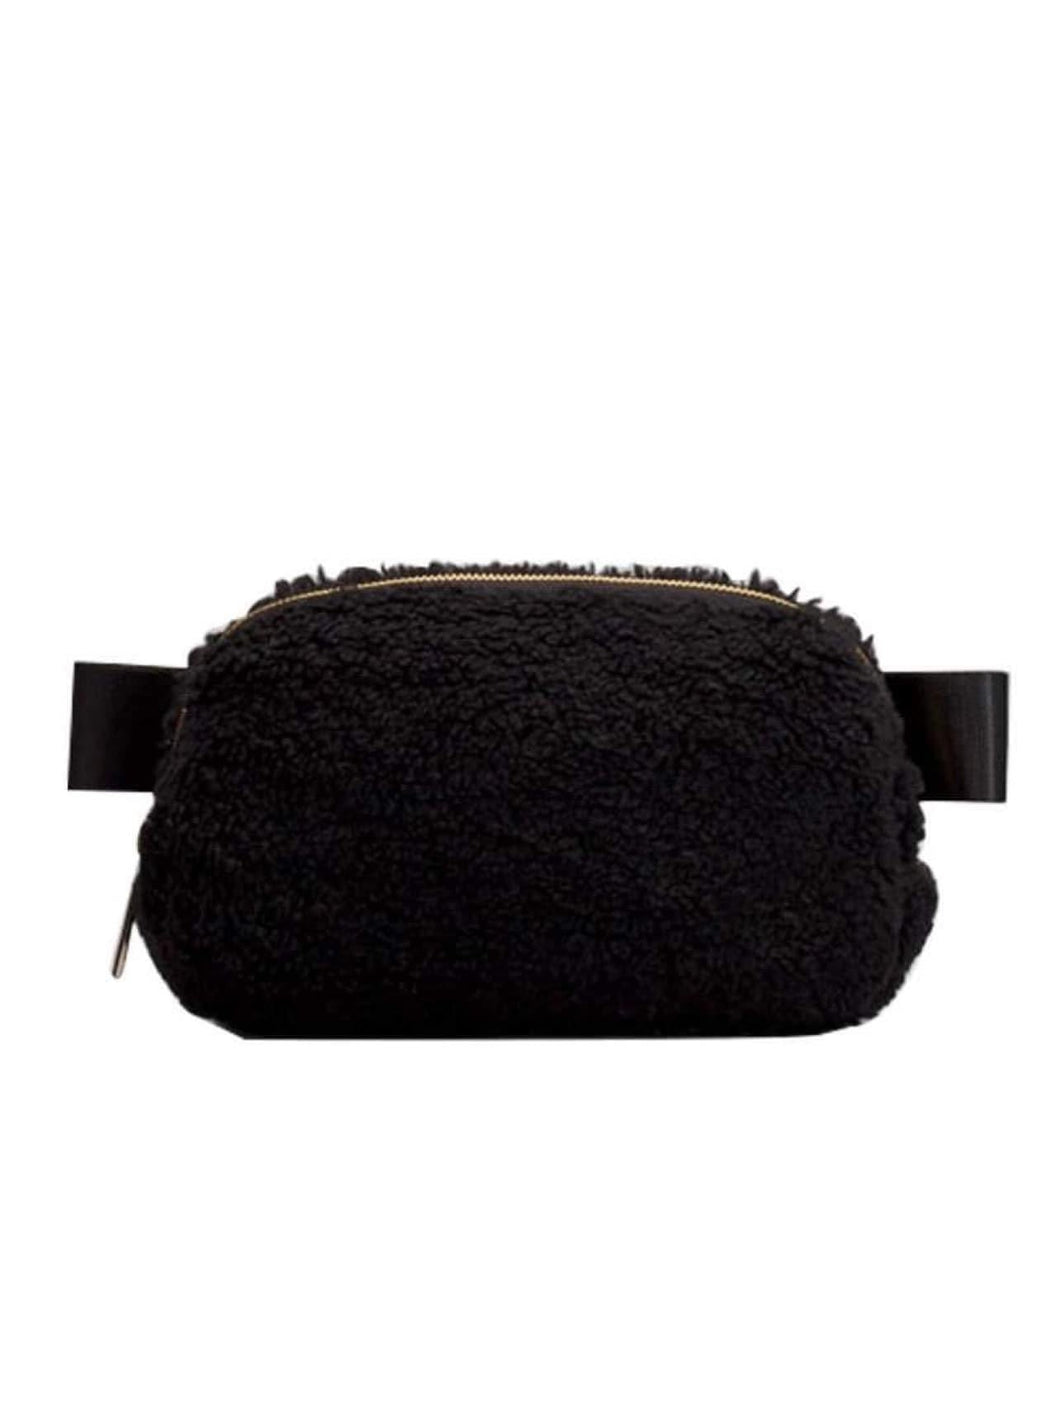 THE TEDDY SHERPA FANNY PACK - black